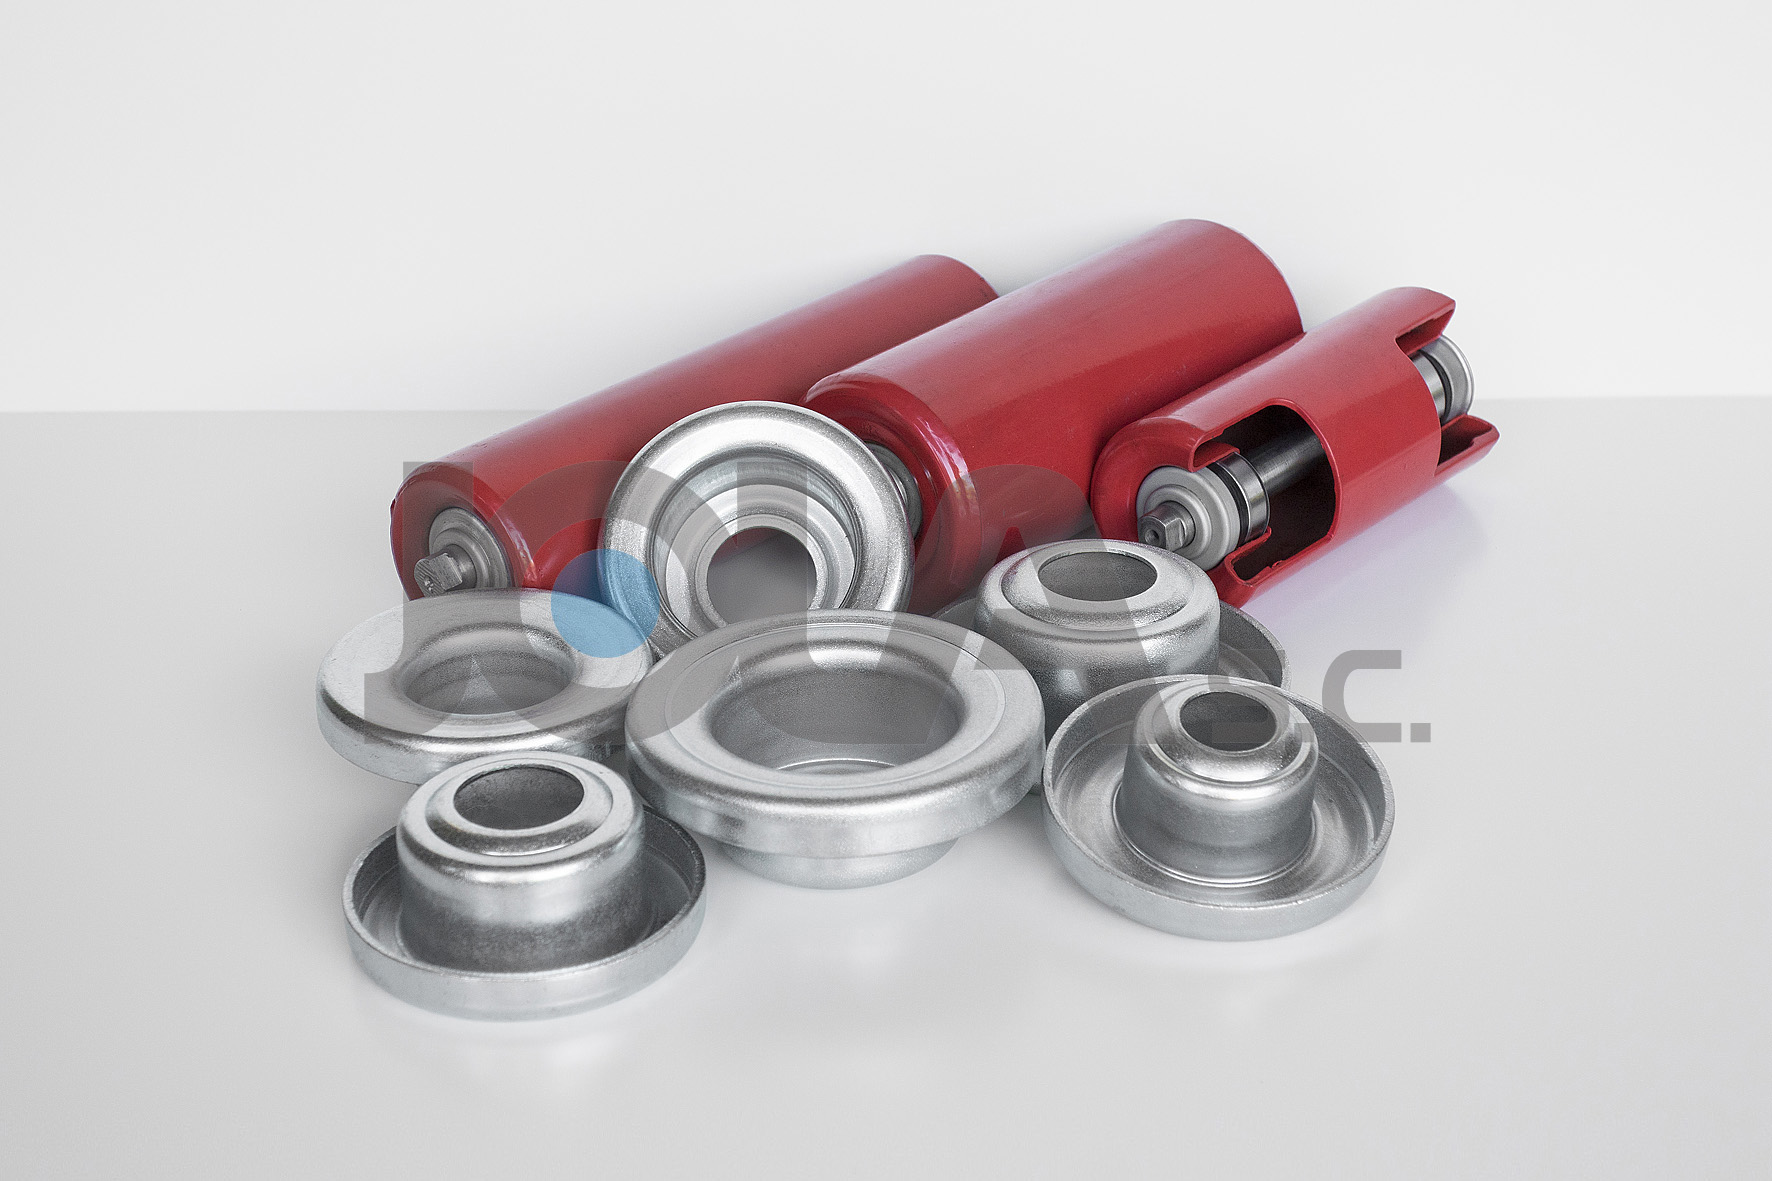 JOLA we produce all kinds of pressed elements that are part of the rollers (idlers) of belt conveyors, we produce bearing housings, seals, elements for idlers.